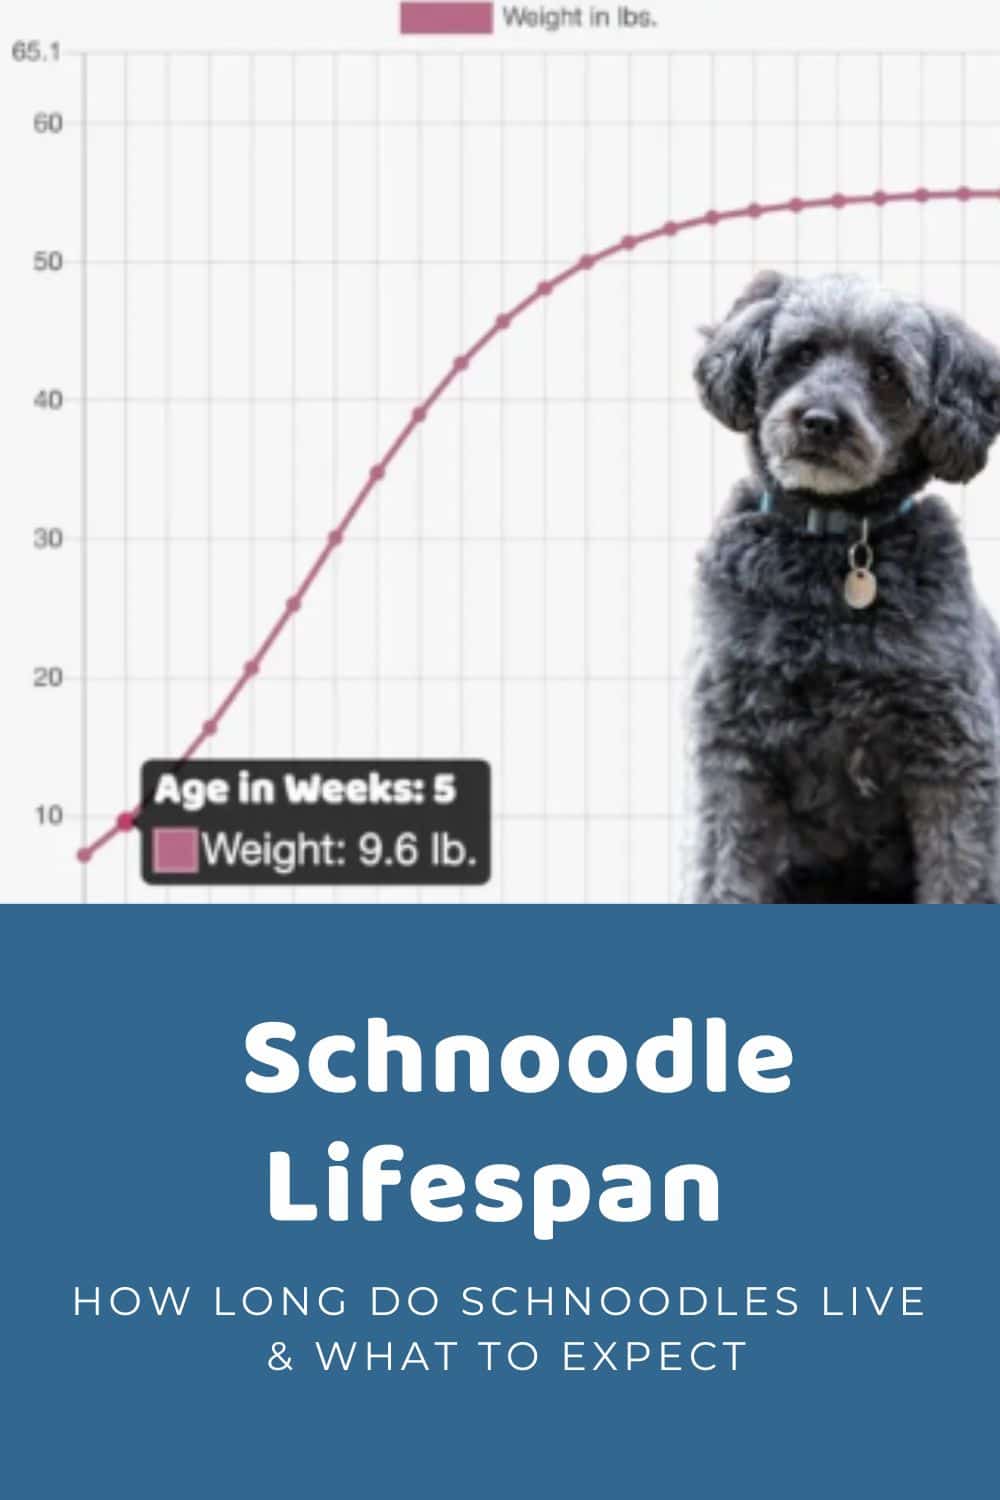 Schnoodle Lifespan & What To Expect How Long Do Schnoodles Live